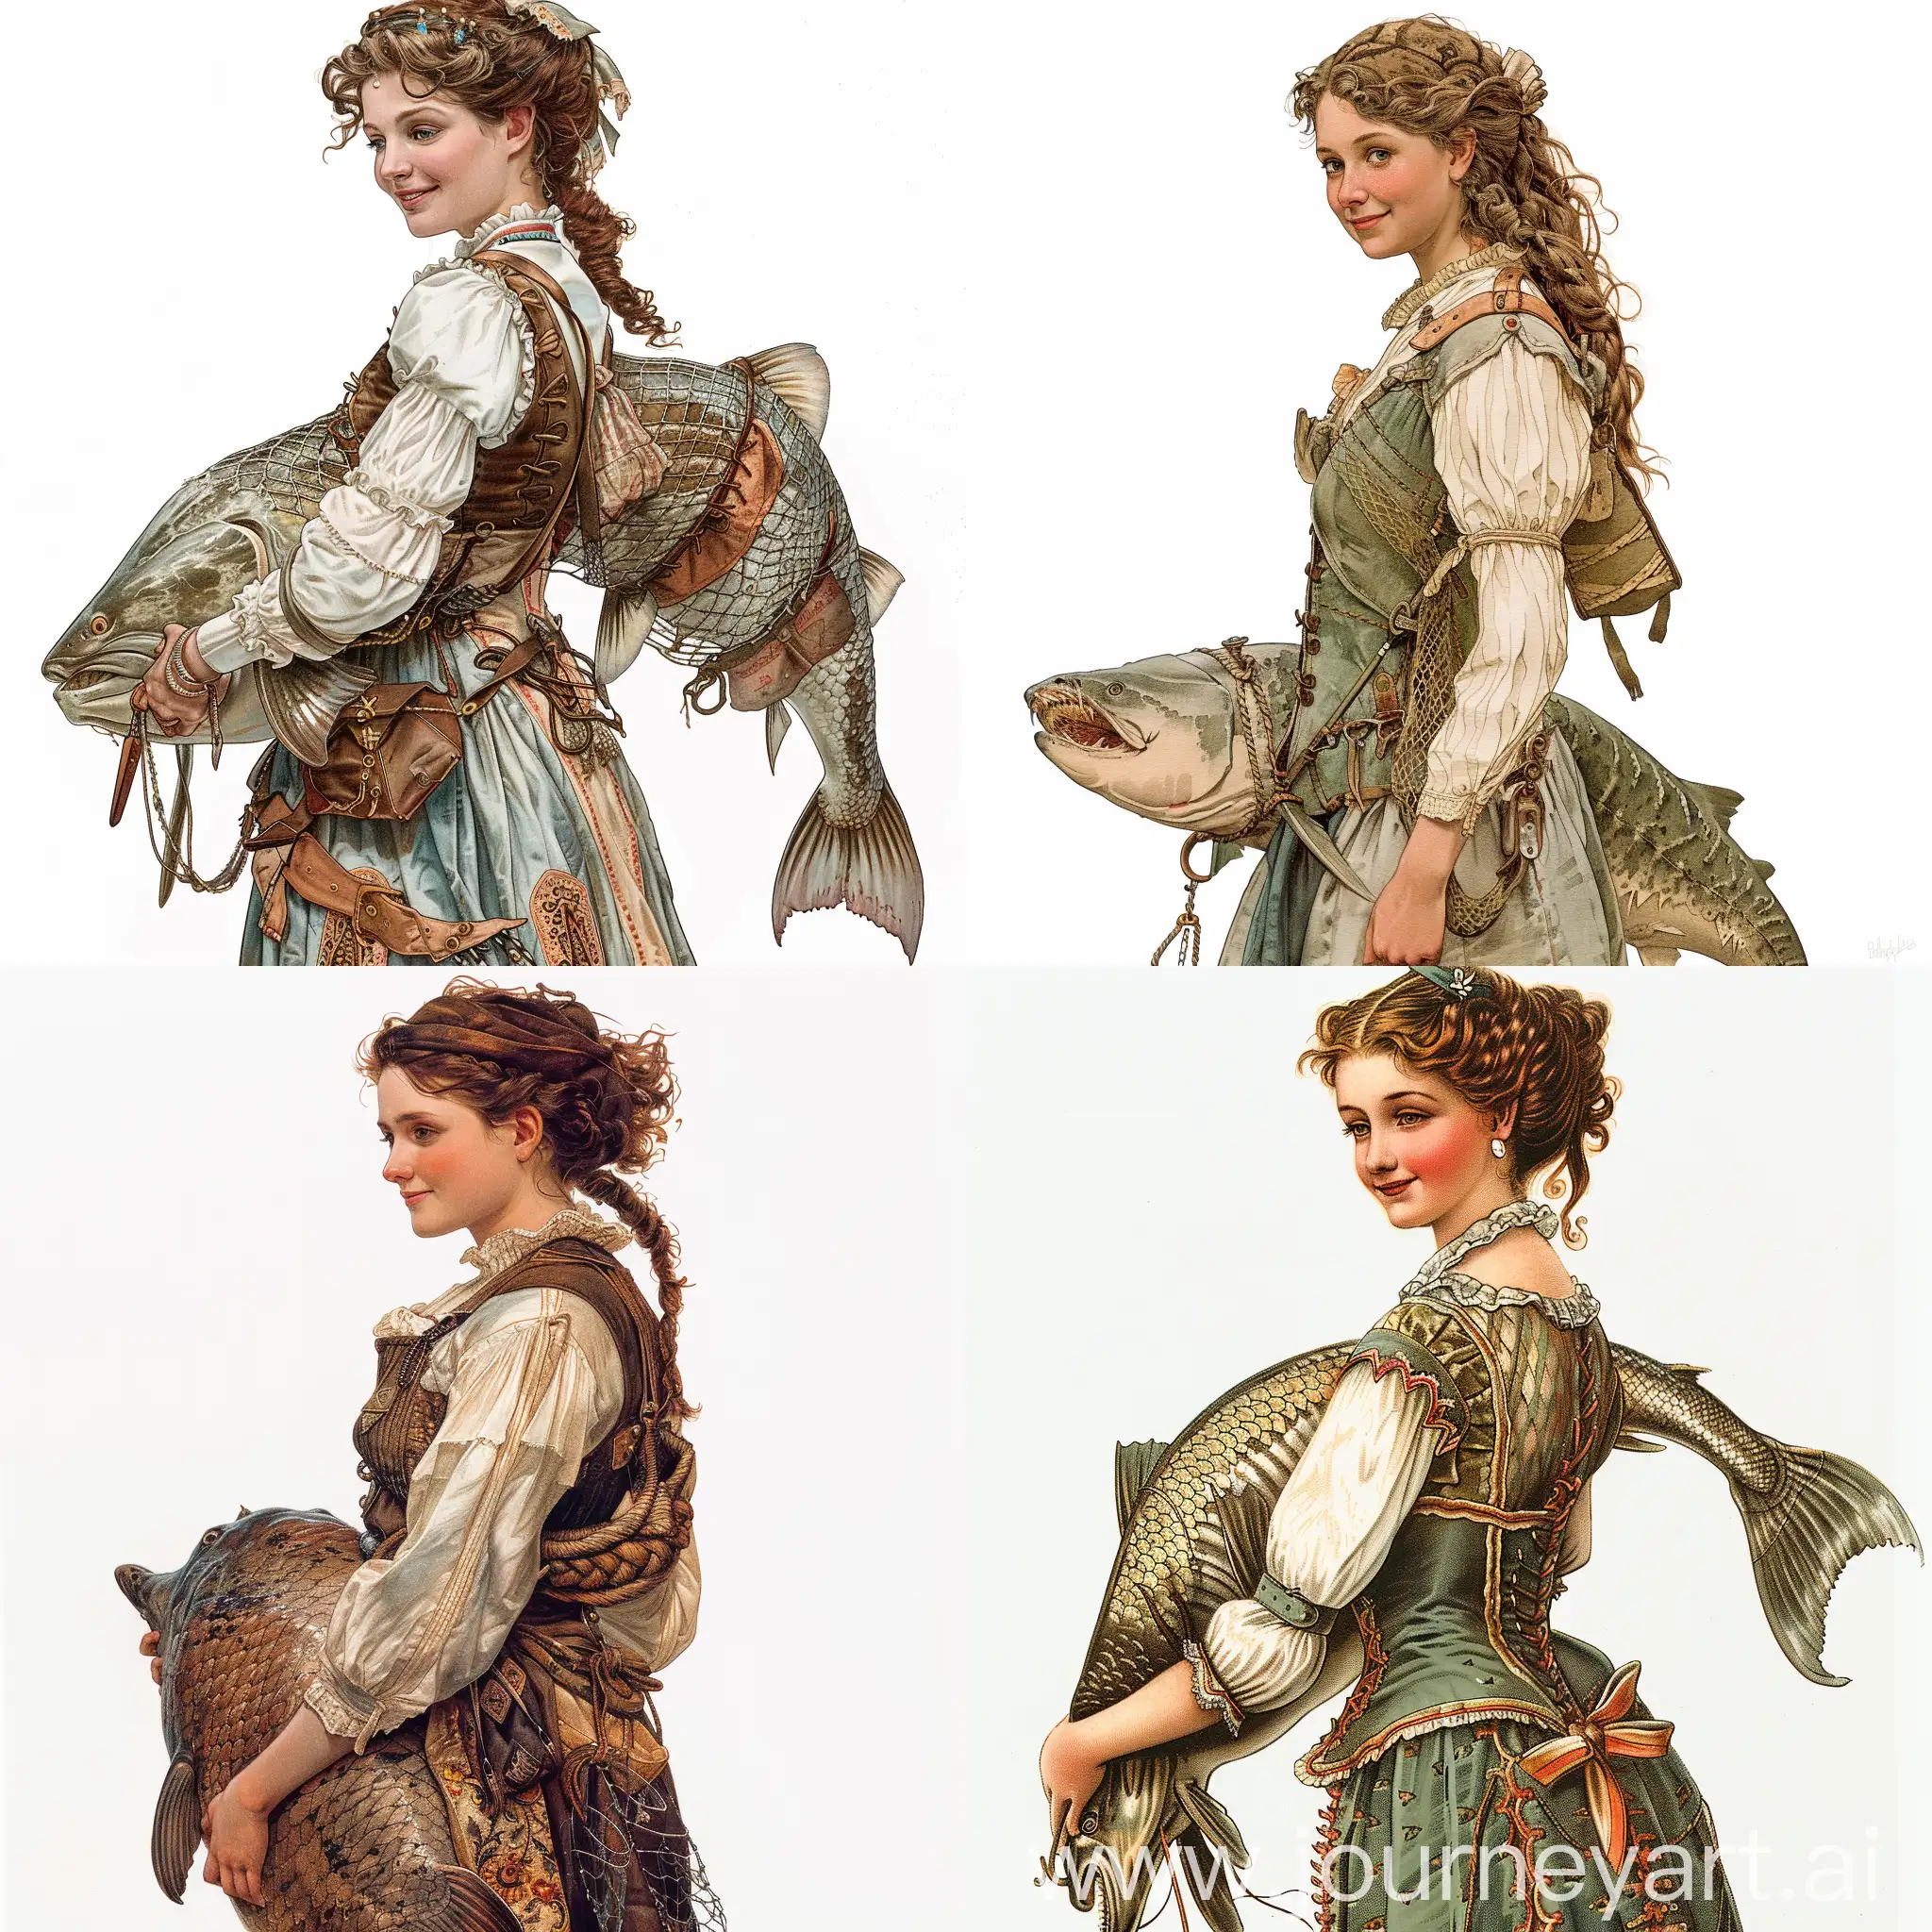 Beautiful woman, waist-length portrait in profile, slightly smiling, in antique fishing clothes, lots of details, holding a large sturgeon under her arm, white background, illustration, Gustav Robert Hegfeldt style